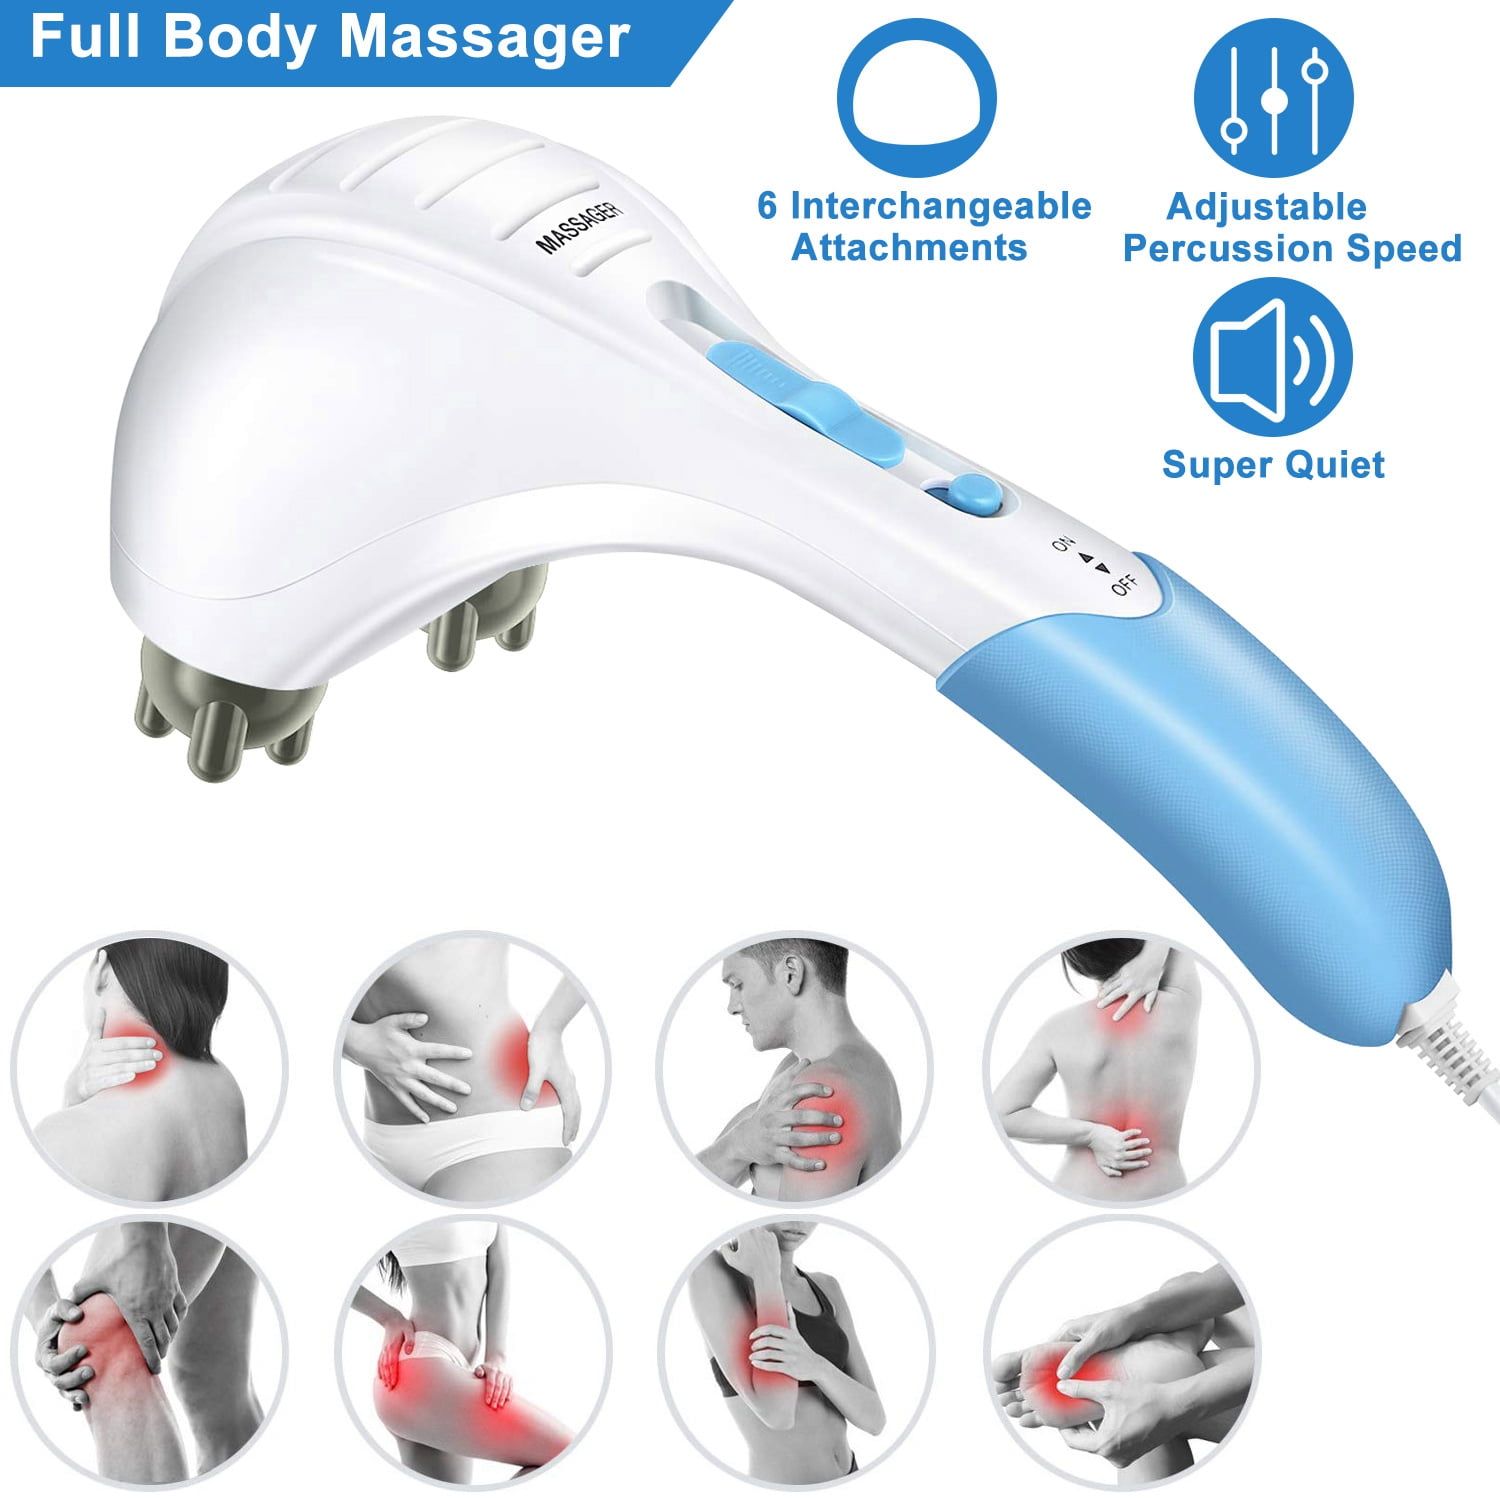 Buy QONETIC Electric Handheld Body Massager Machine for Remove